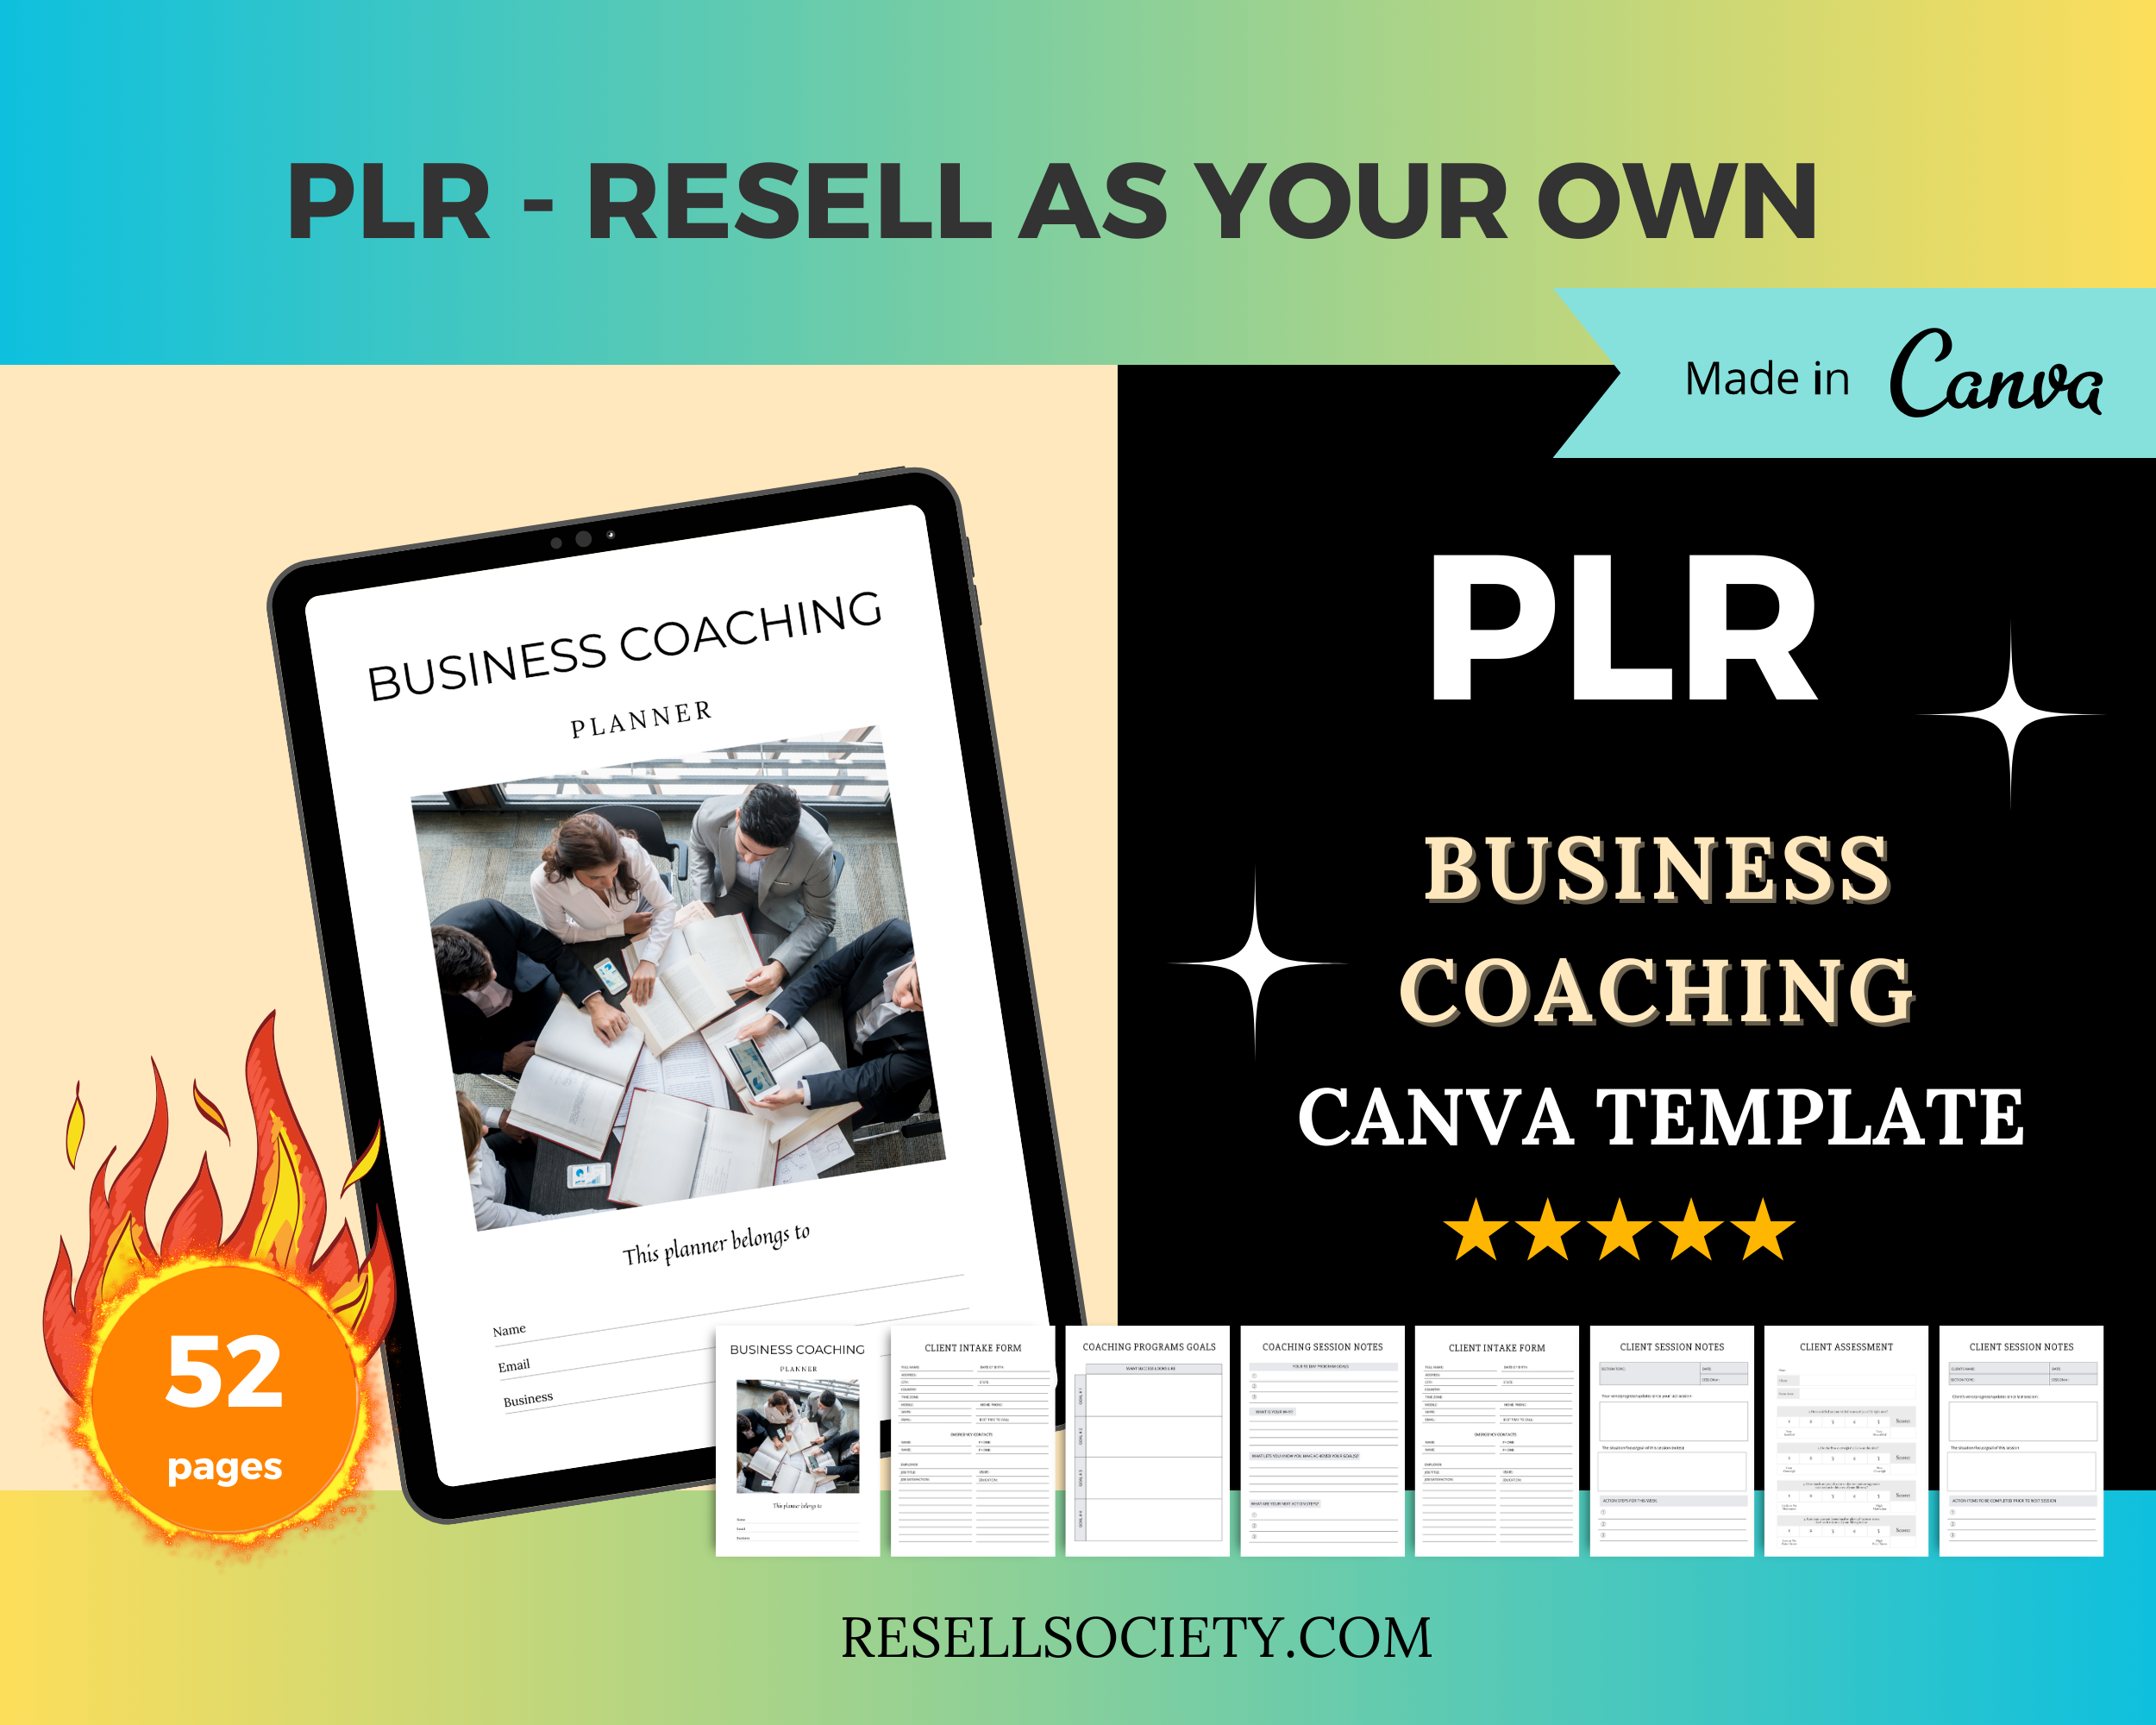 Editable Business Coaching Planner Template in Canva | Canva Template Pack | Business Coaching Template | Commercial Use